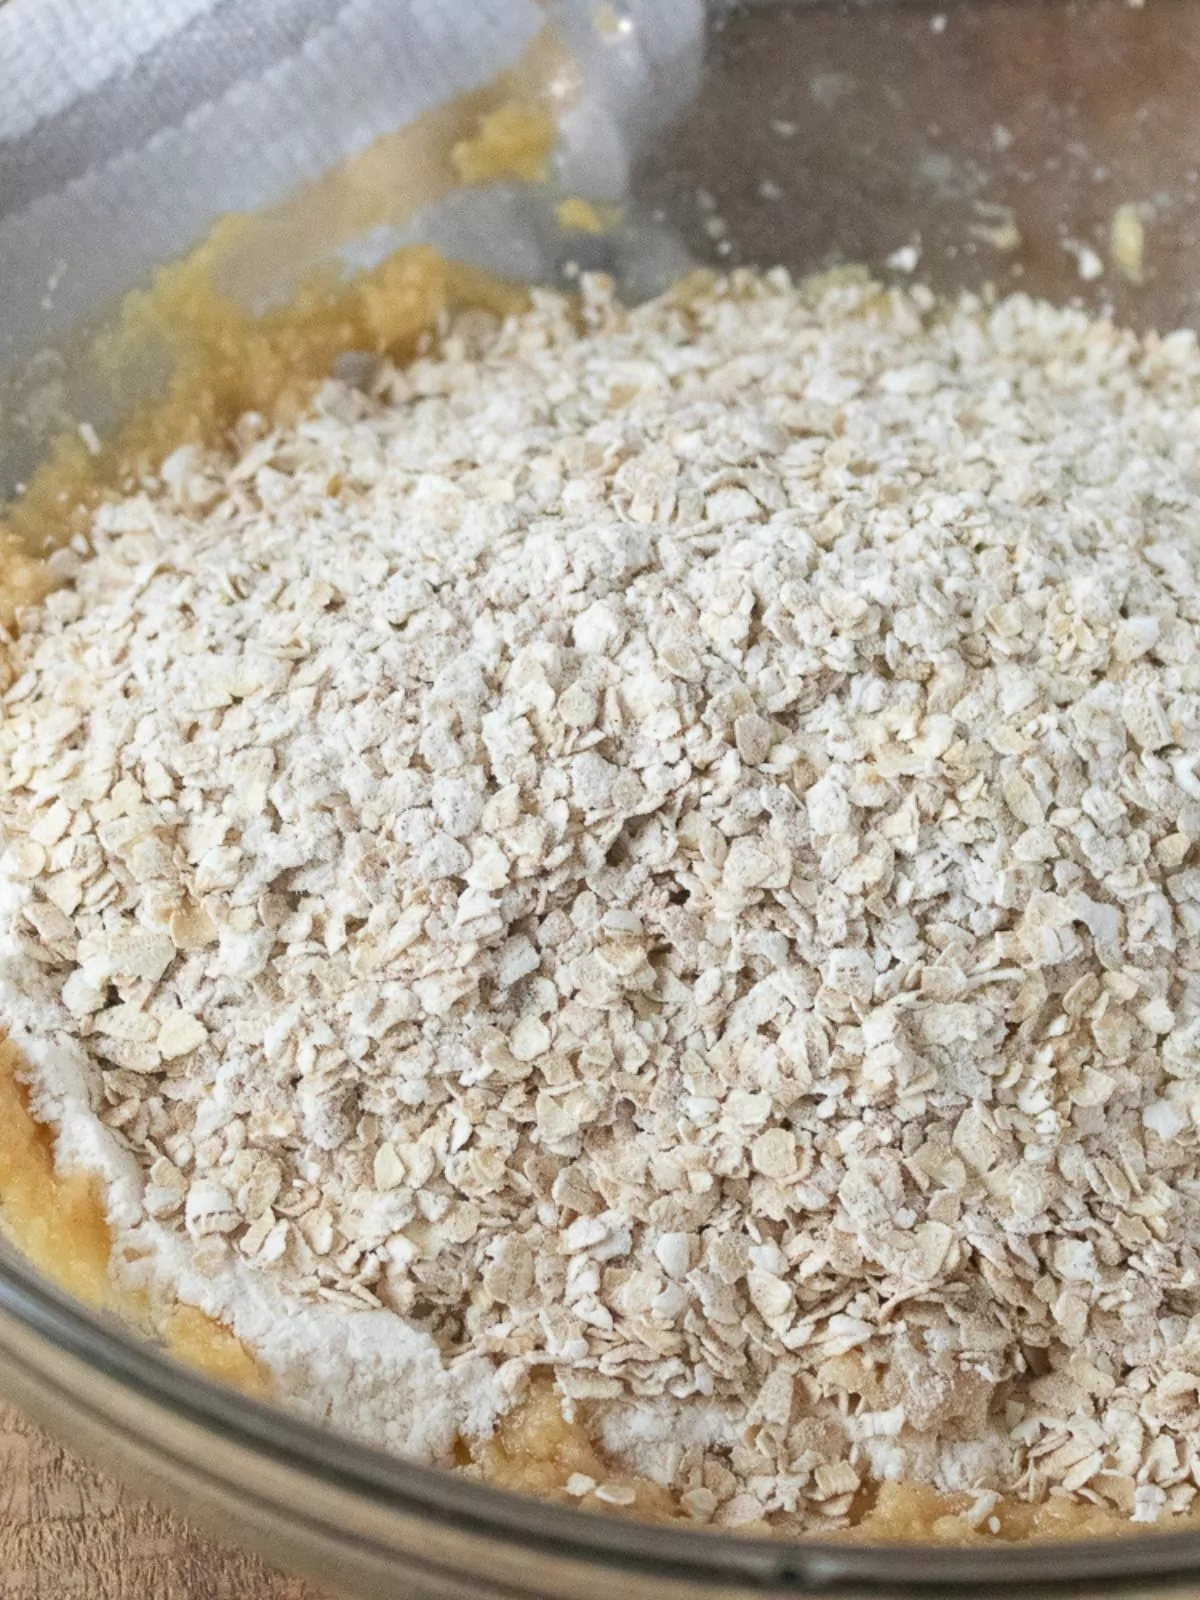 Add oatmeal to wet ingredients.